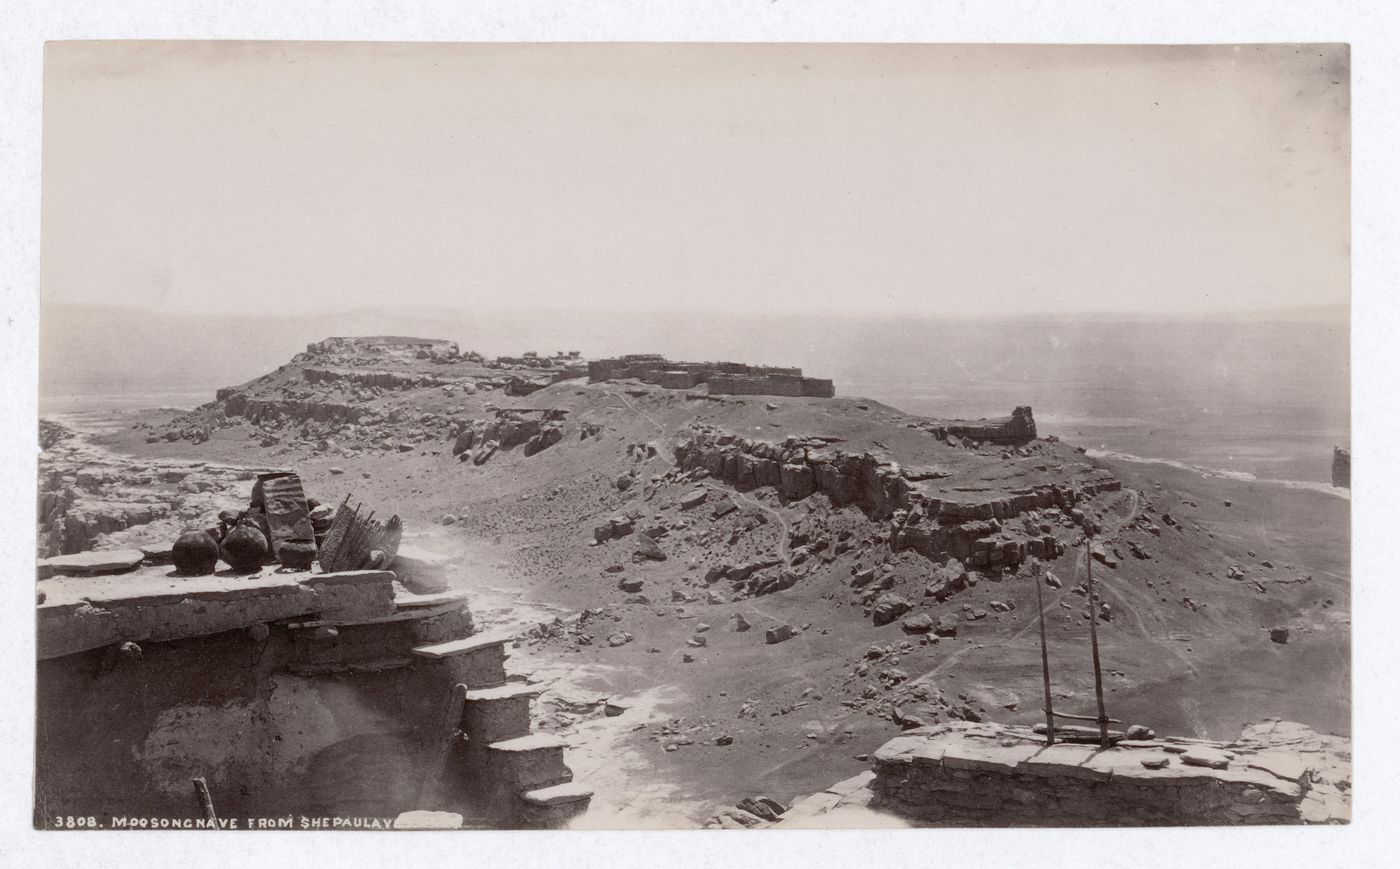 View of Moosongnave (now Mishongnovi) from Shepaulave (now Sipaulovi) on the Second Mesa, Hopi Reservation, Arizona, United States